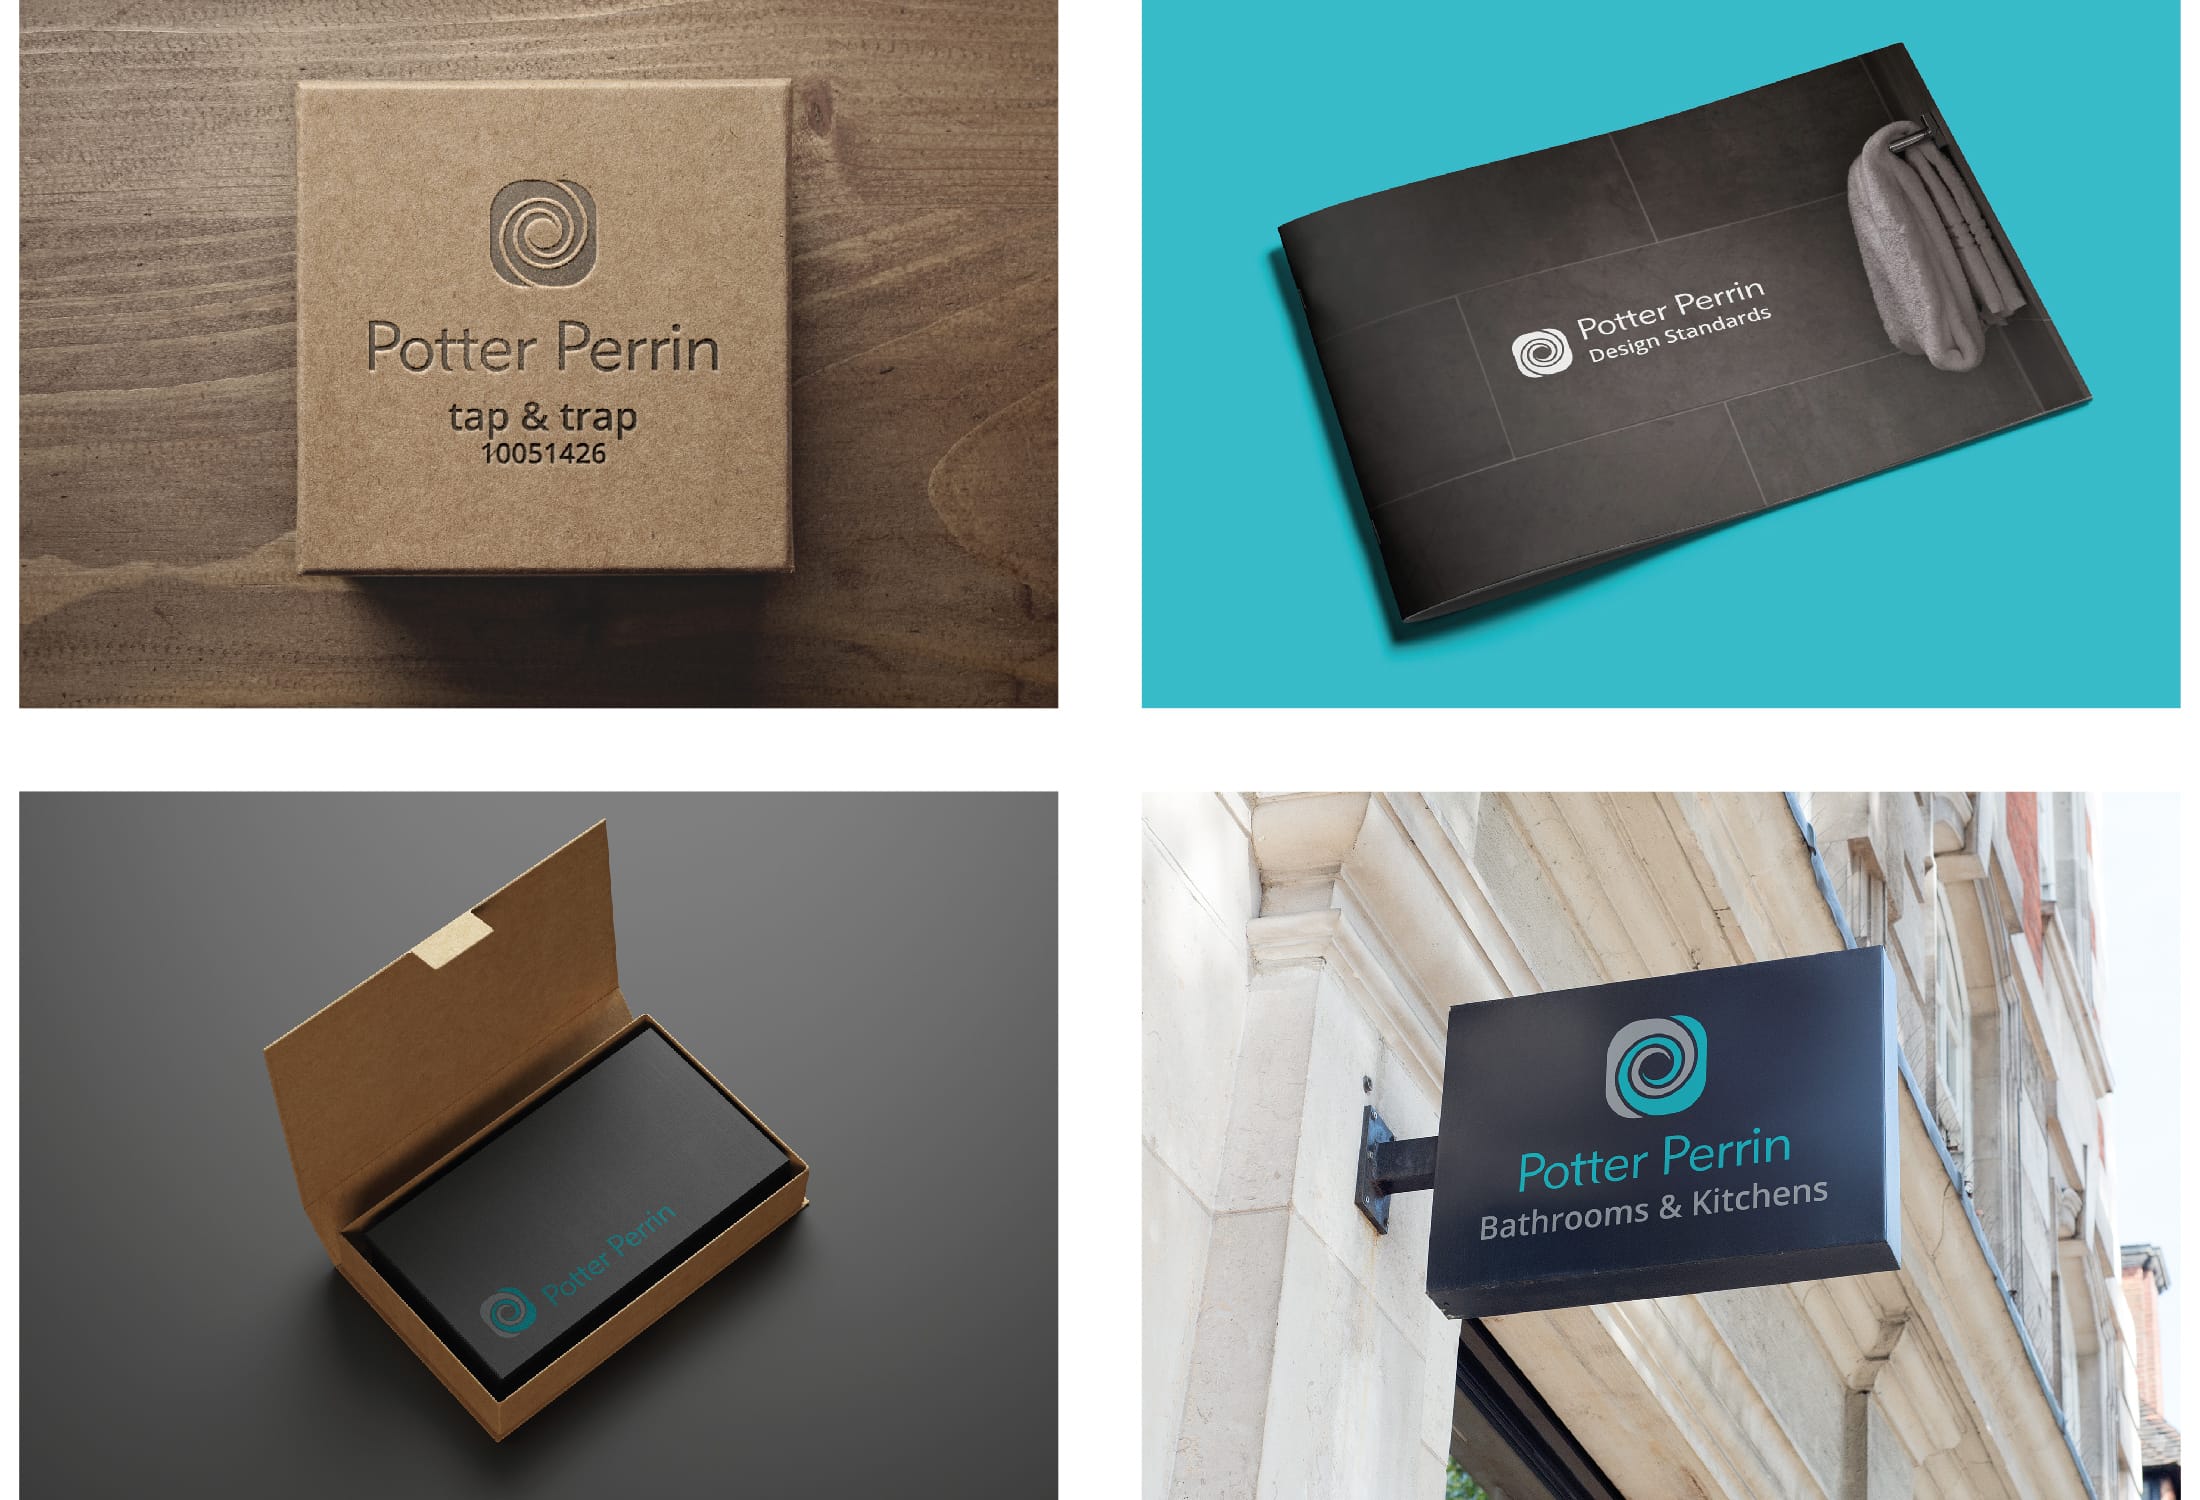 Potter Perrin Bathrooms and Kitchens Branding